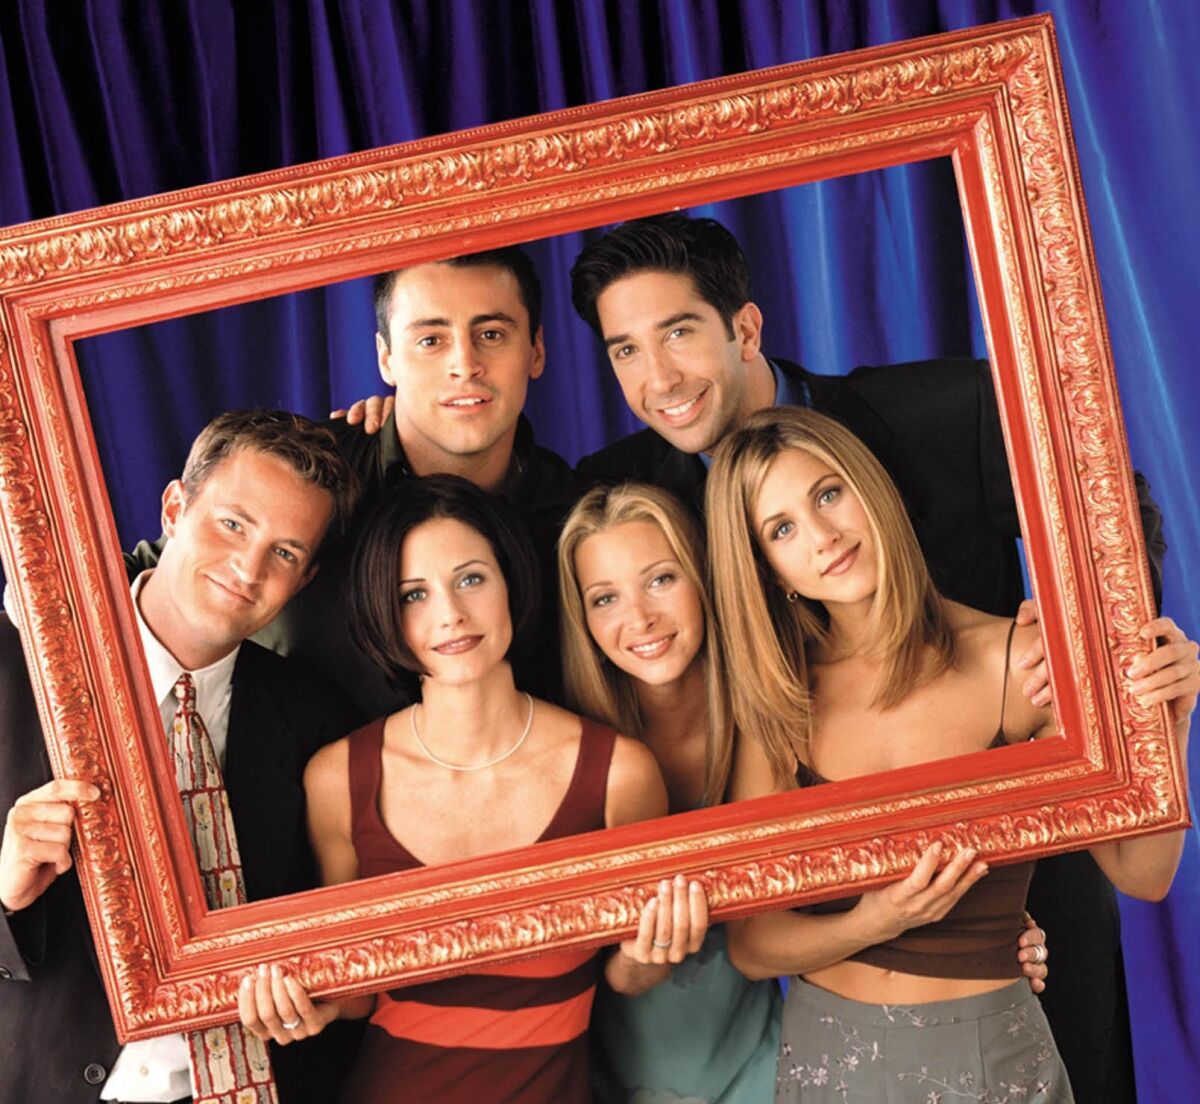 Matt LeBlanc, clockwise, David Schwimmer, Jennifer Aniston, Lisa Kudrow, Courteney Cox and Matthew Perry in a photo from their days on the NBC sitcom "Friends."